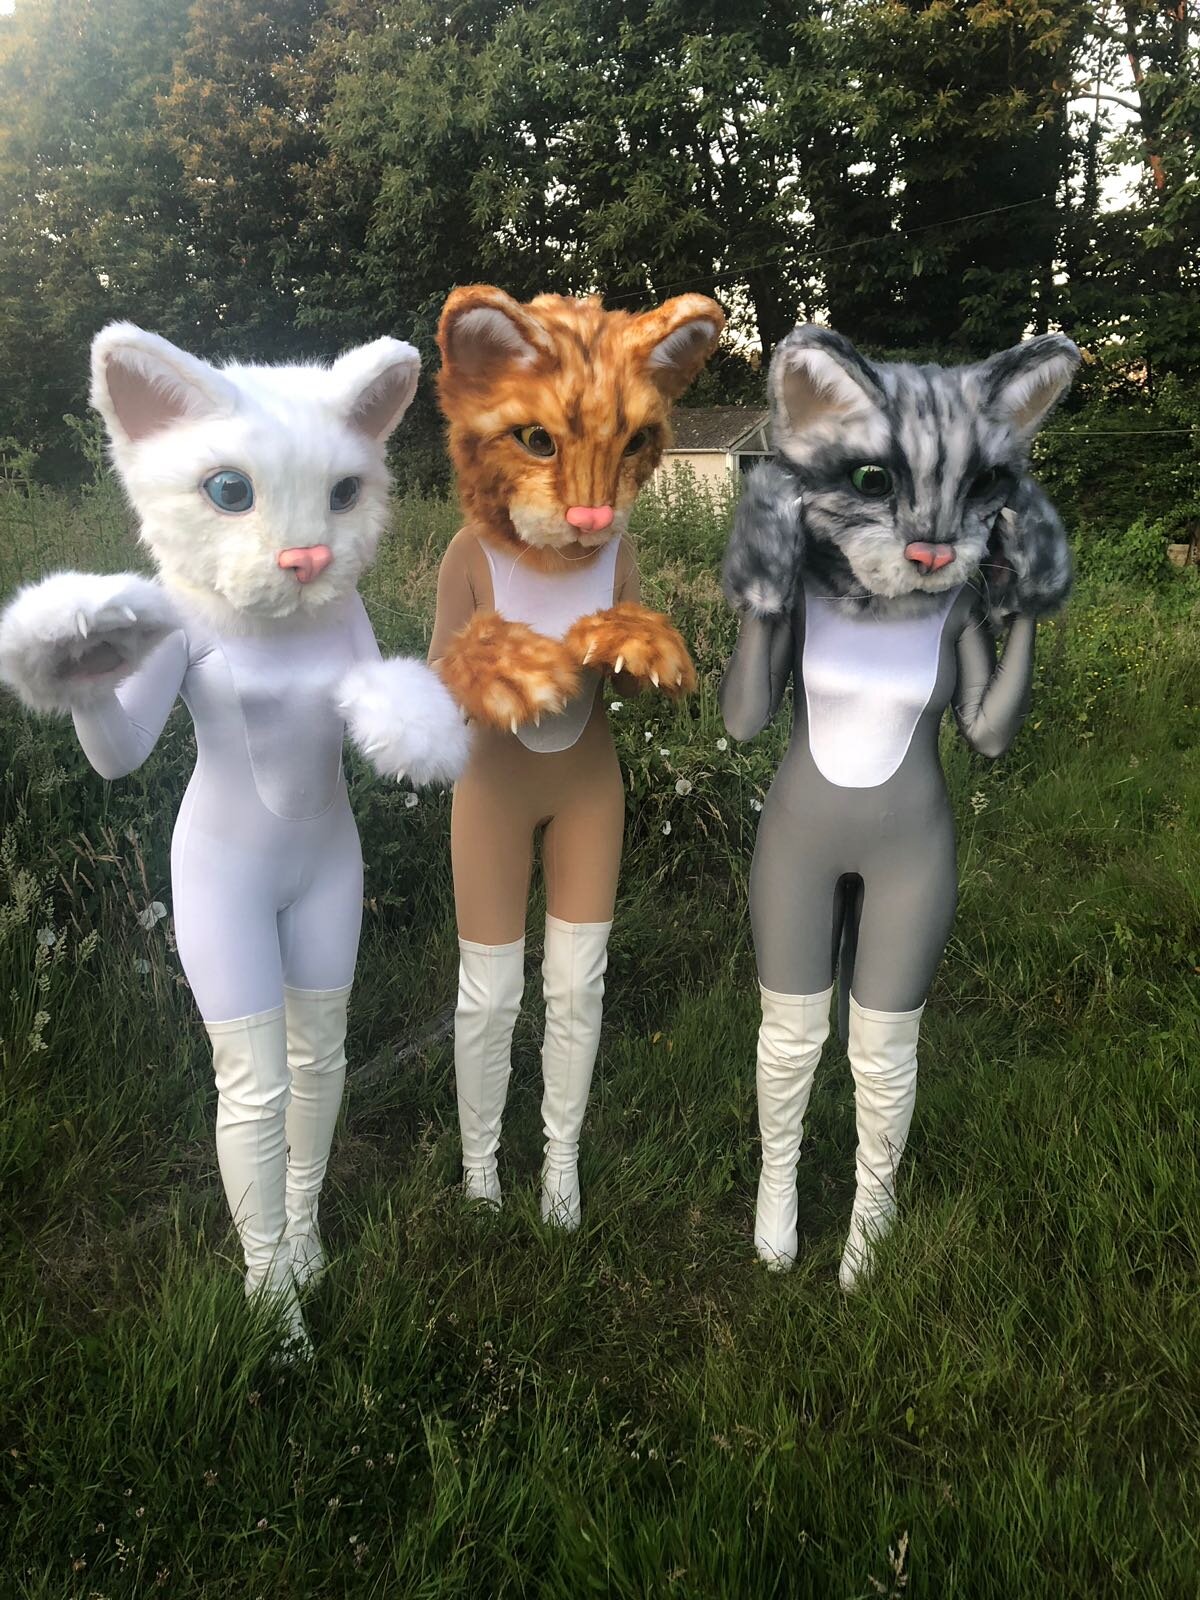 Kitty cat performers at event